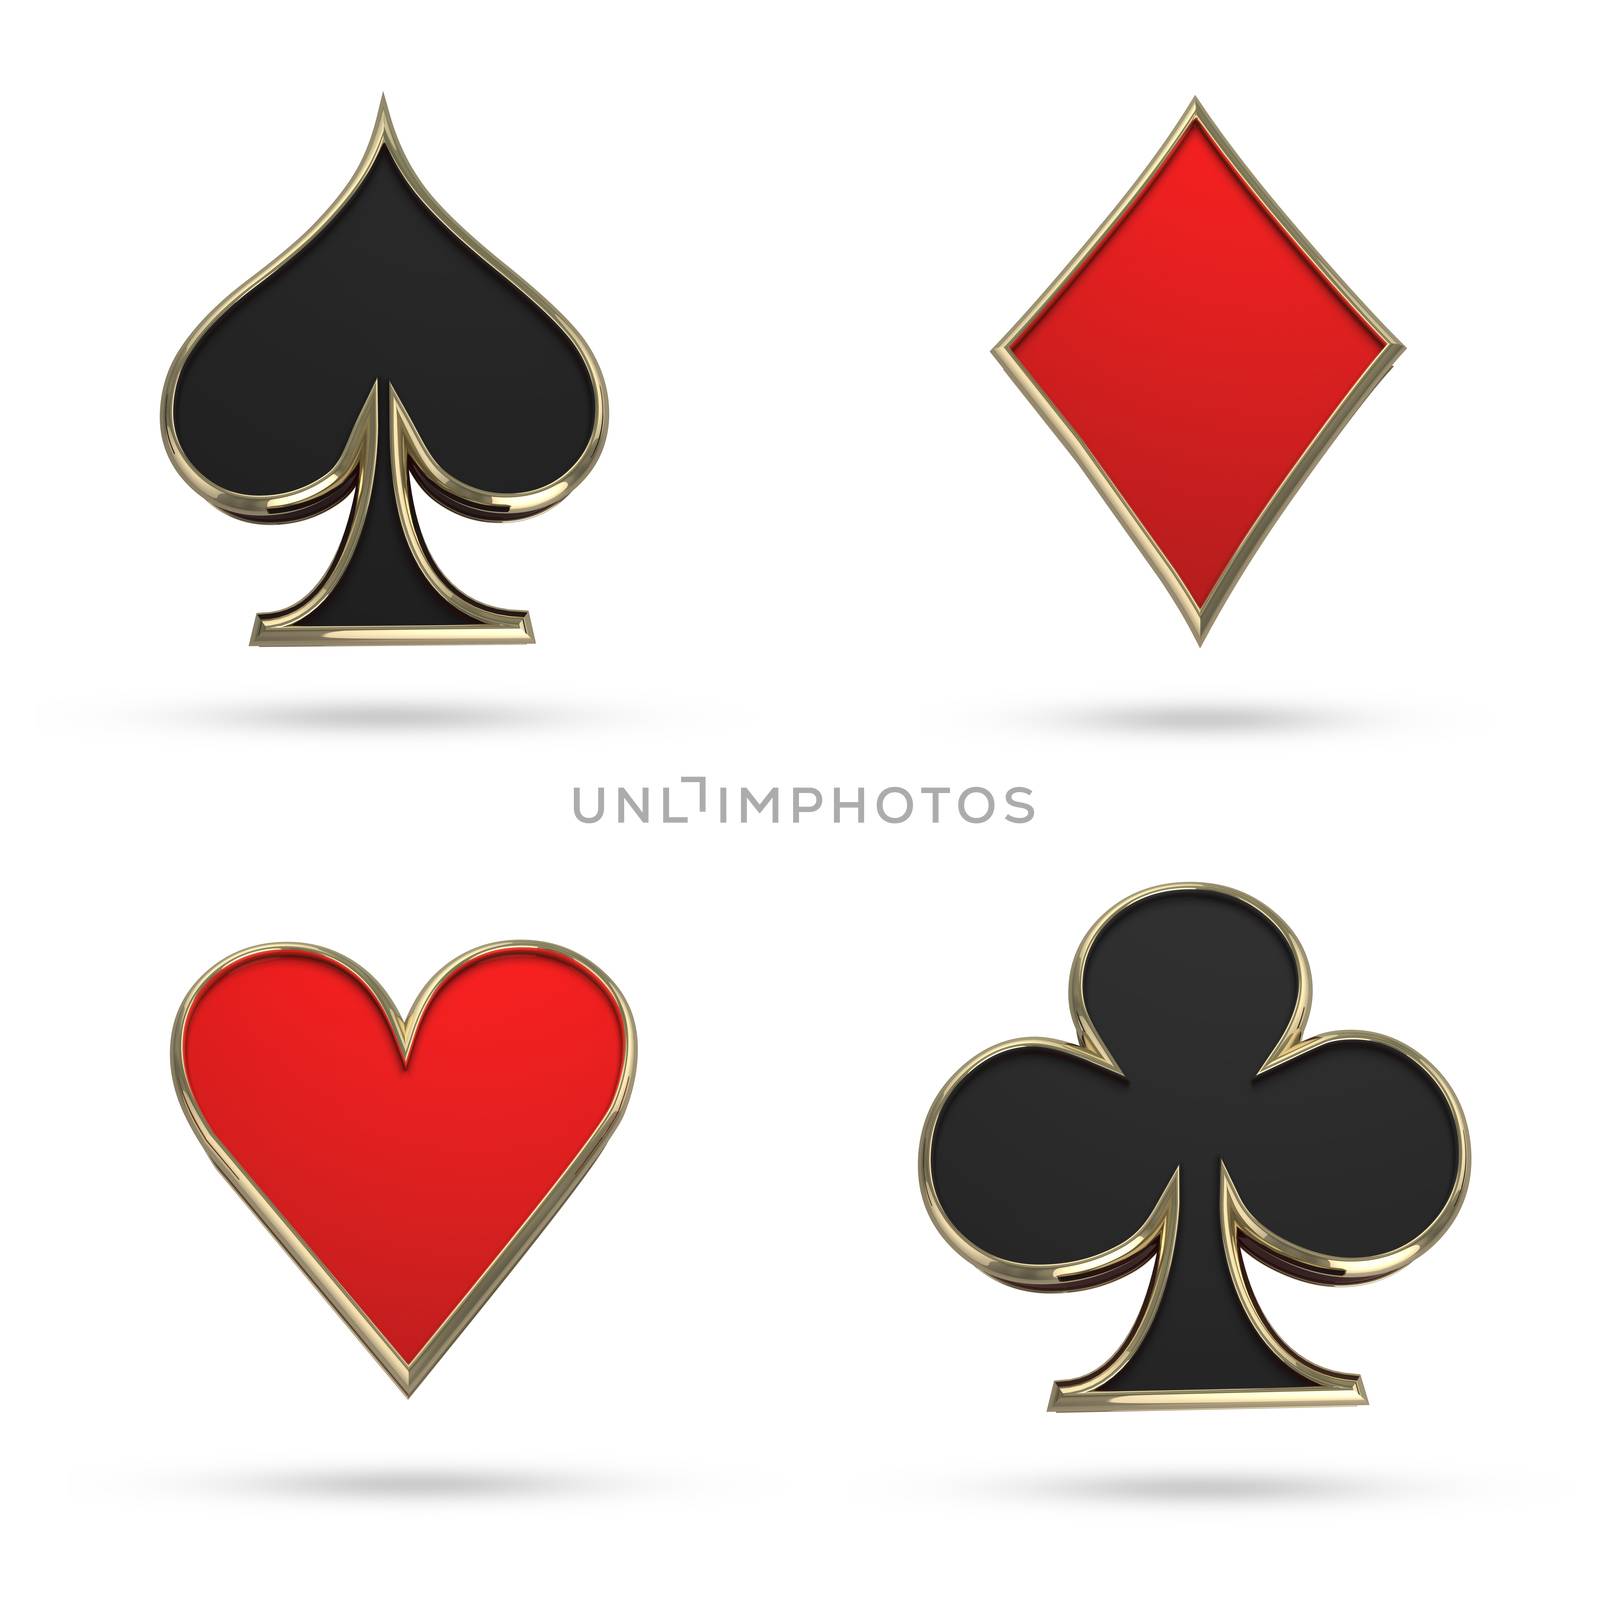 3D Spades, Hearts, Diamonds, Clubs symbols isolated on white